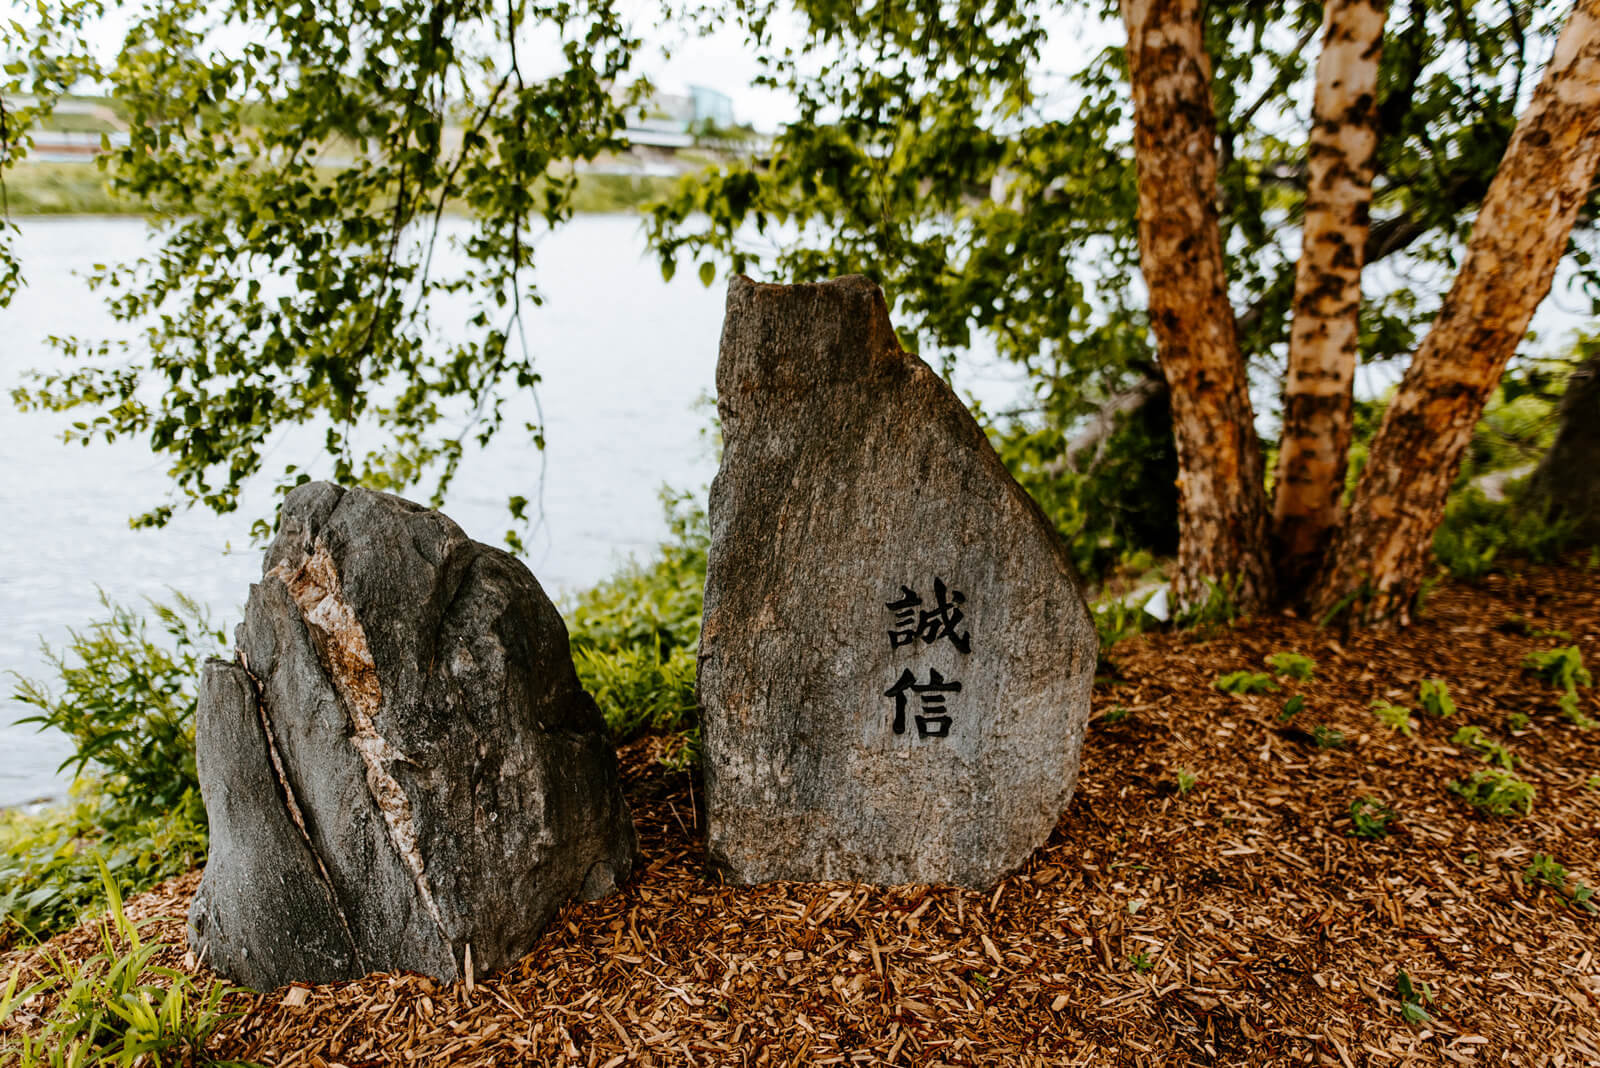 Two boulders next to each other, and the right one has Chinese characters carved on it.